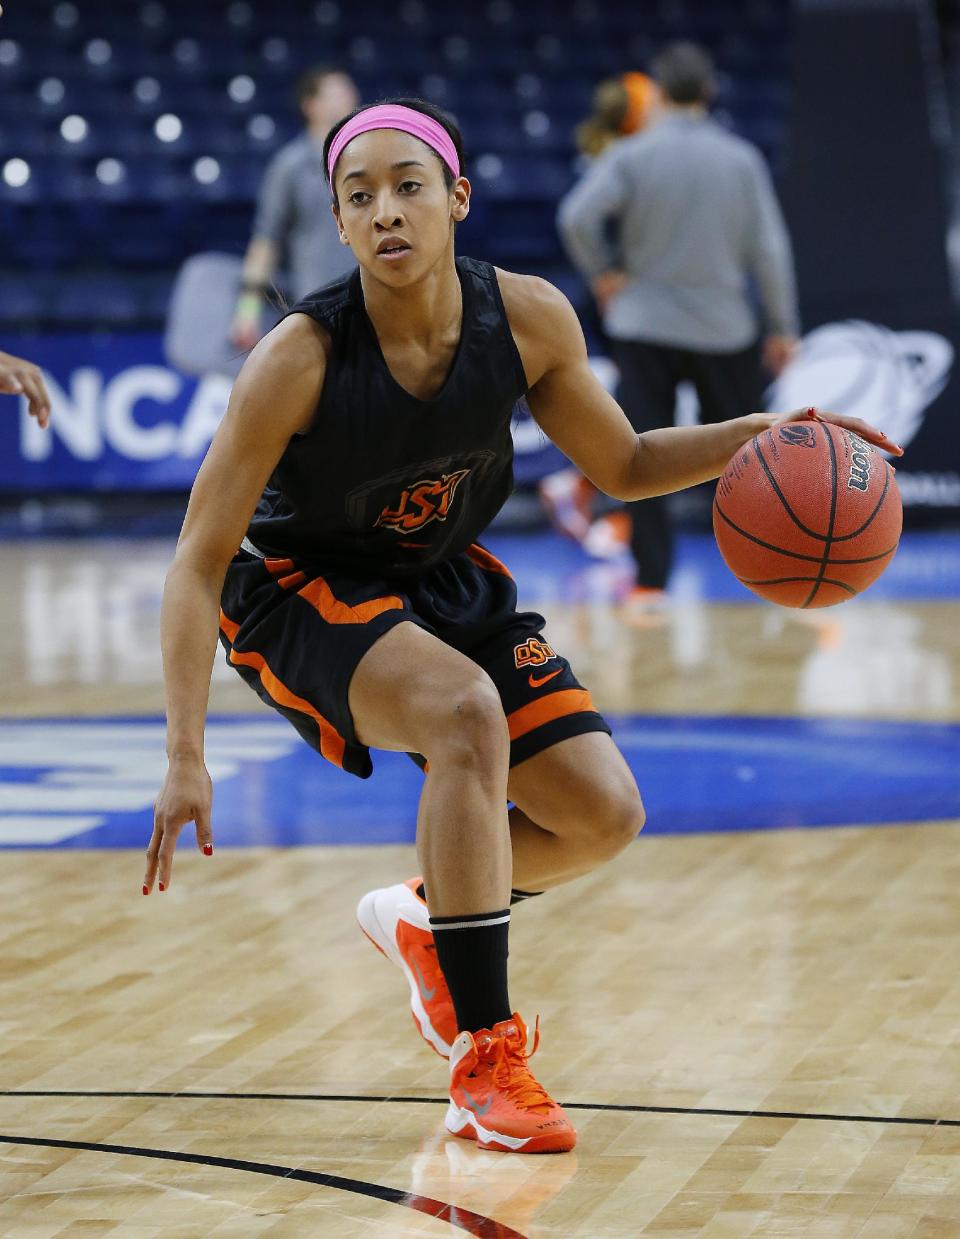 Oklahoma State guard Tiffany Bias dribbles during an NCAA women's college basketball tournament practice at the Purcell Pavilion in South Bend, Ind., Friday, March 28, 2014. Oklahoma State plays Notre Dame on Saturday. (AP Photo/Paul Sancya)